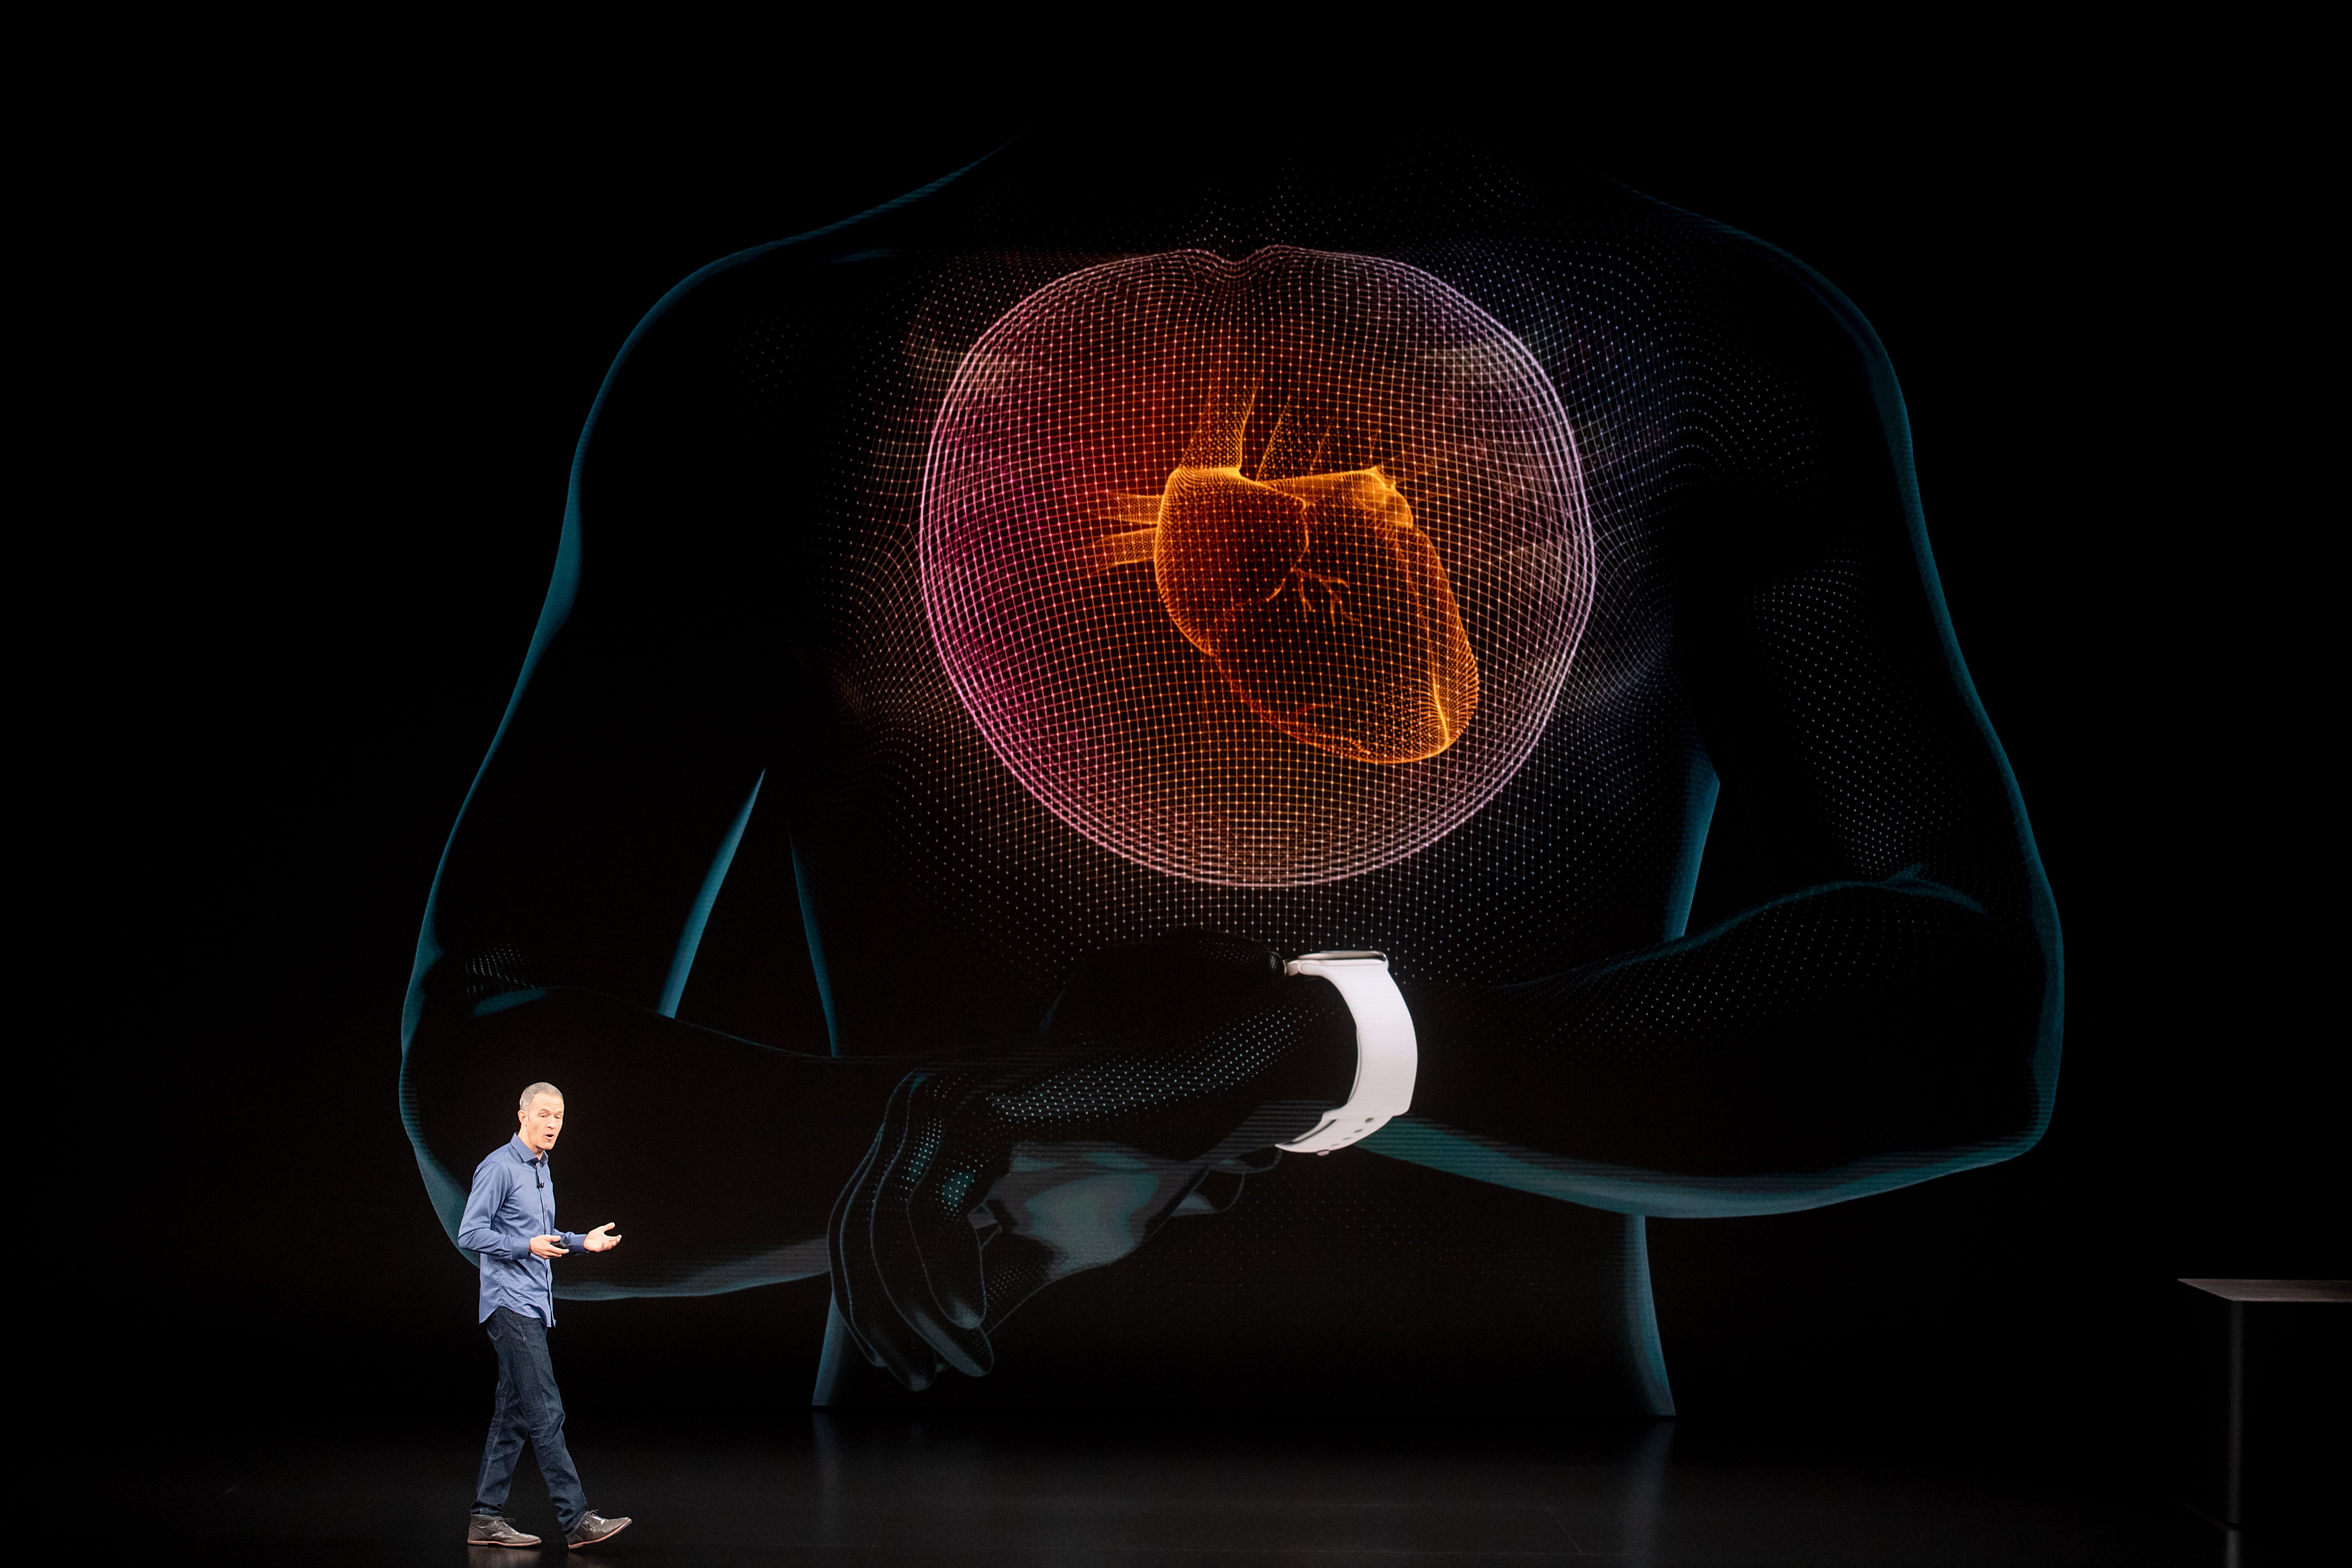 Apple Health Care Plans: New Devices, Tracking Features - Bloomberg